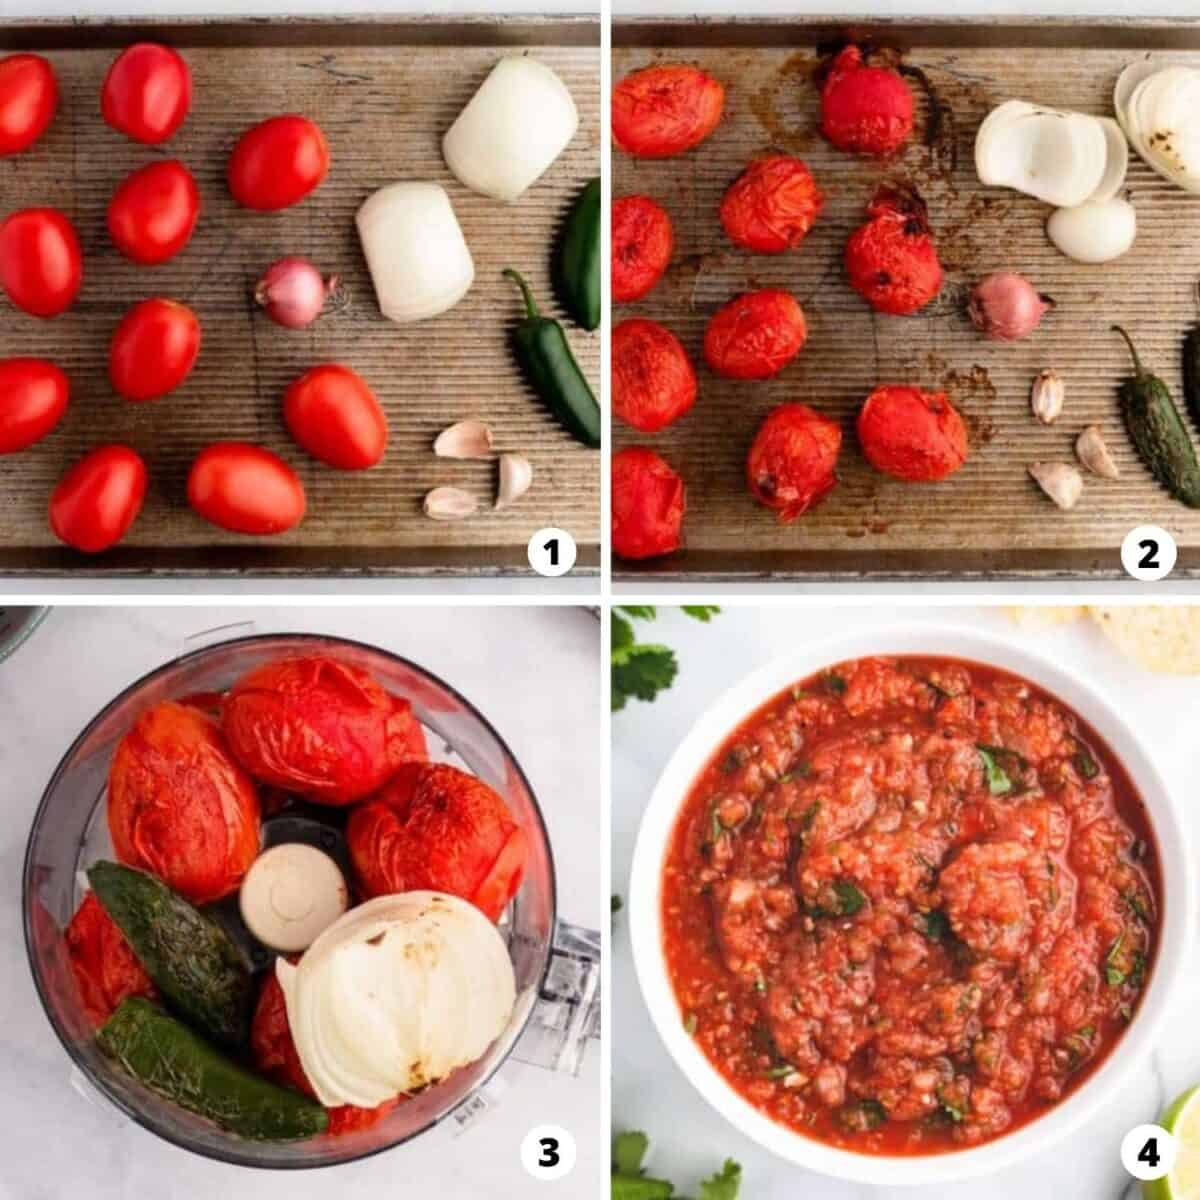 The process of making roasted salsa in a four step photo collage.